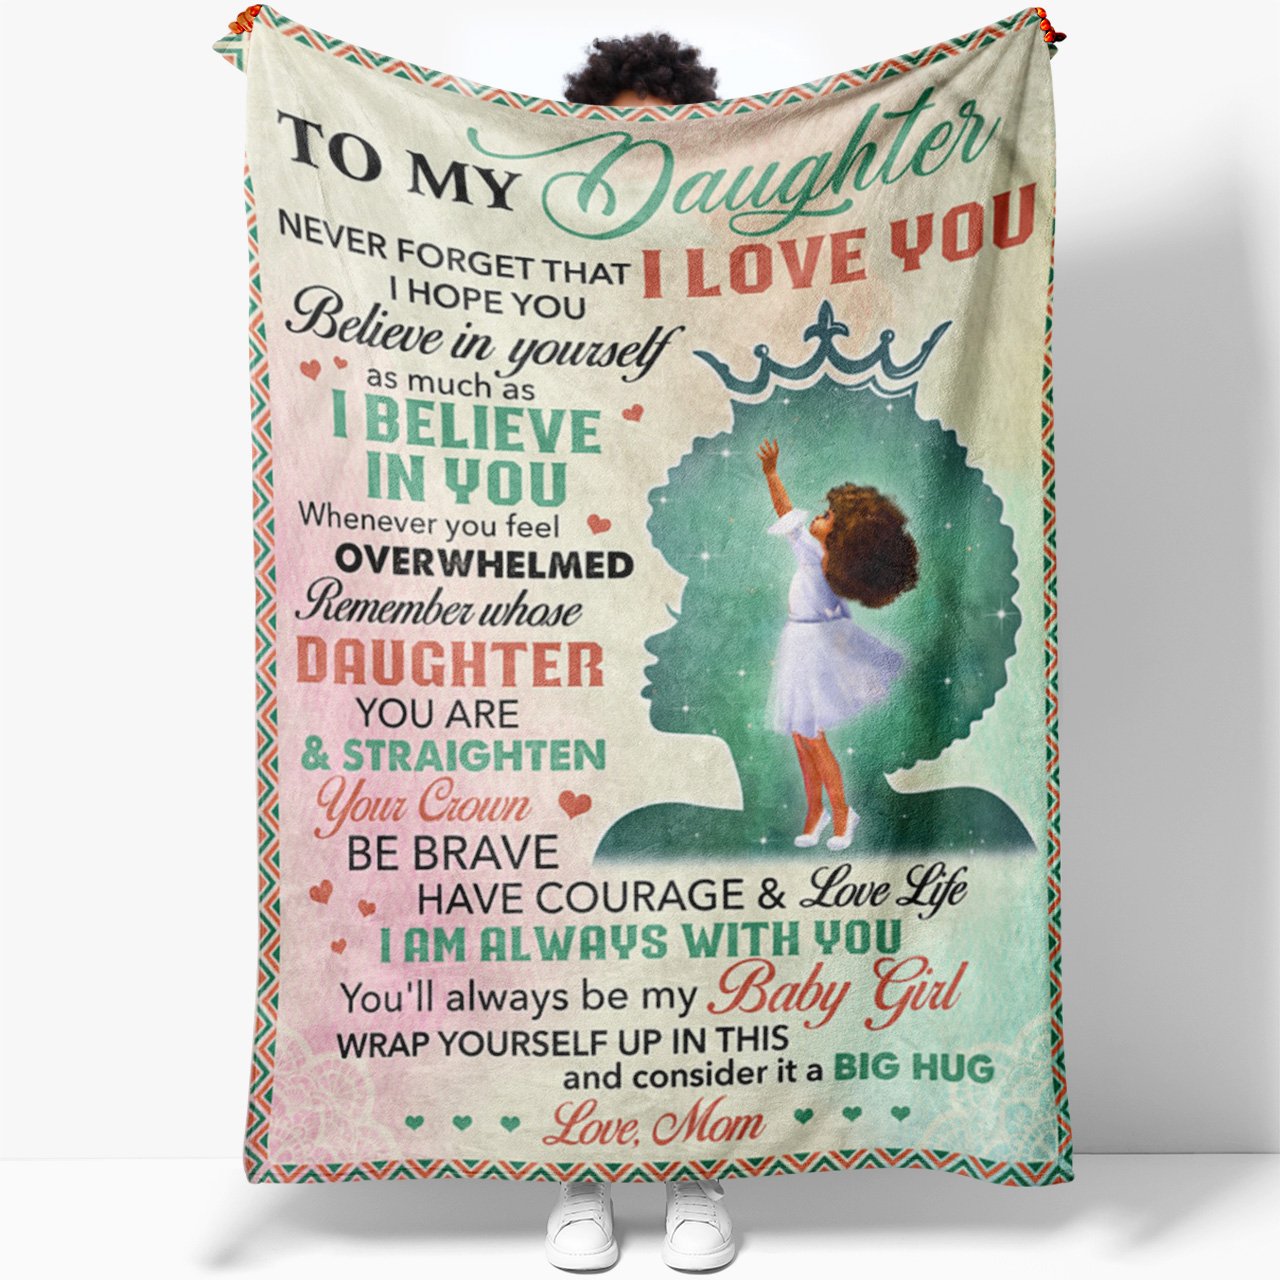 Blanket Gift to My Black Daughter, Straighten Your Crown Be Brave Have  Courage Blanket, Mother Daughter Gifts, Birthday Gifts For Adult Daughter -  Sweet Family Gift